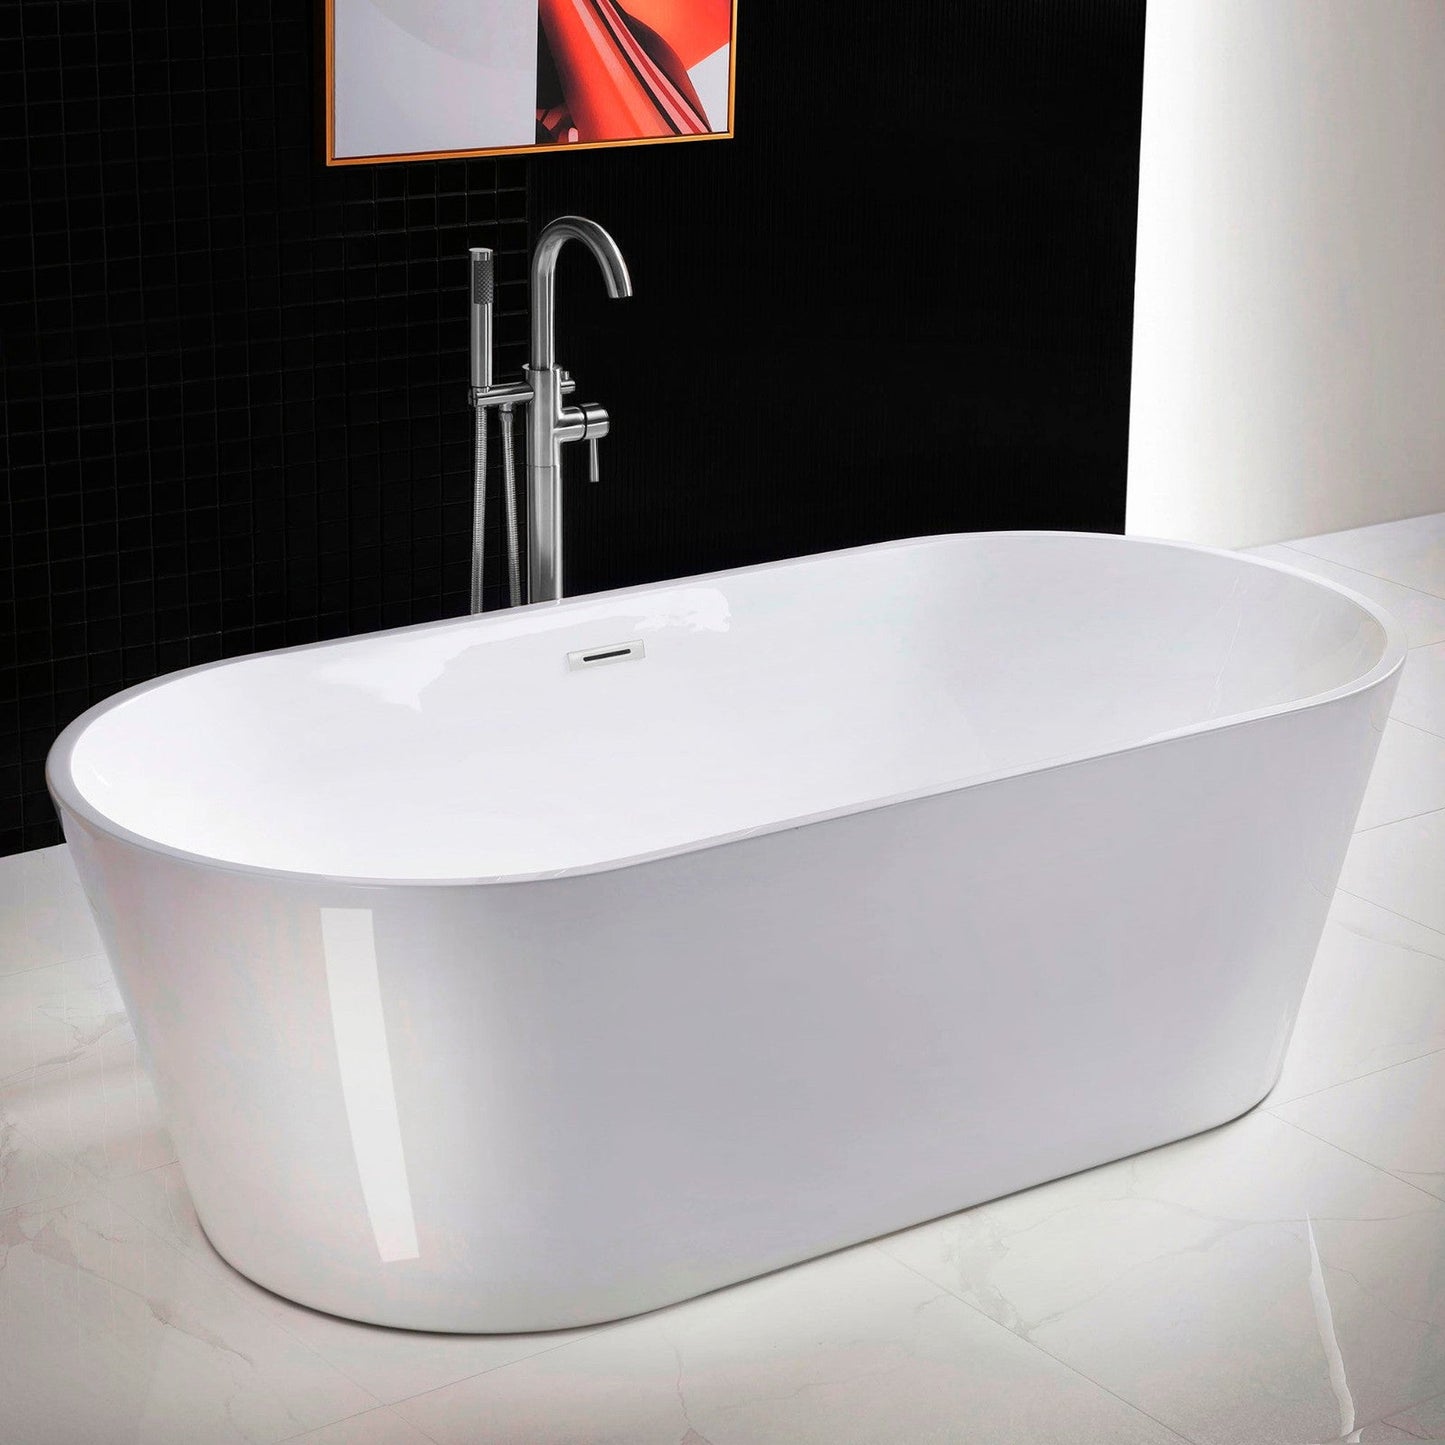 WoodBridge 71" White Acrylic Freestanding Contemporary Soaking Bathtub With Chrome Drain, Overflow, F0024CHVT Tub Filler and Caddy Tray